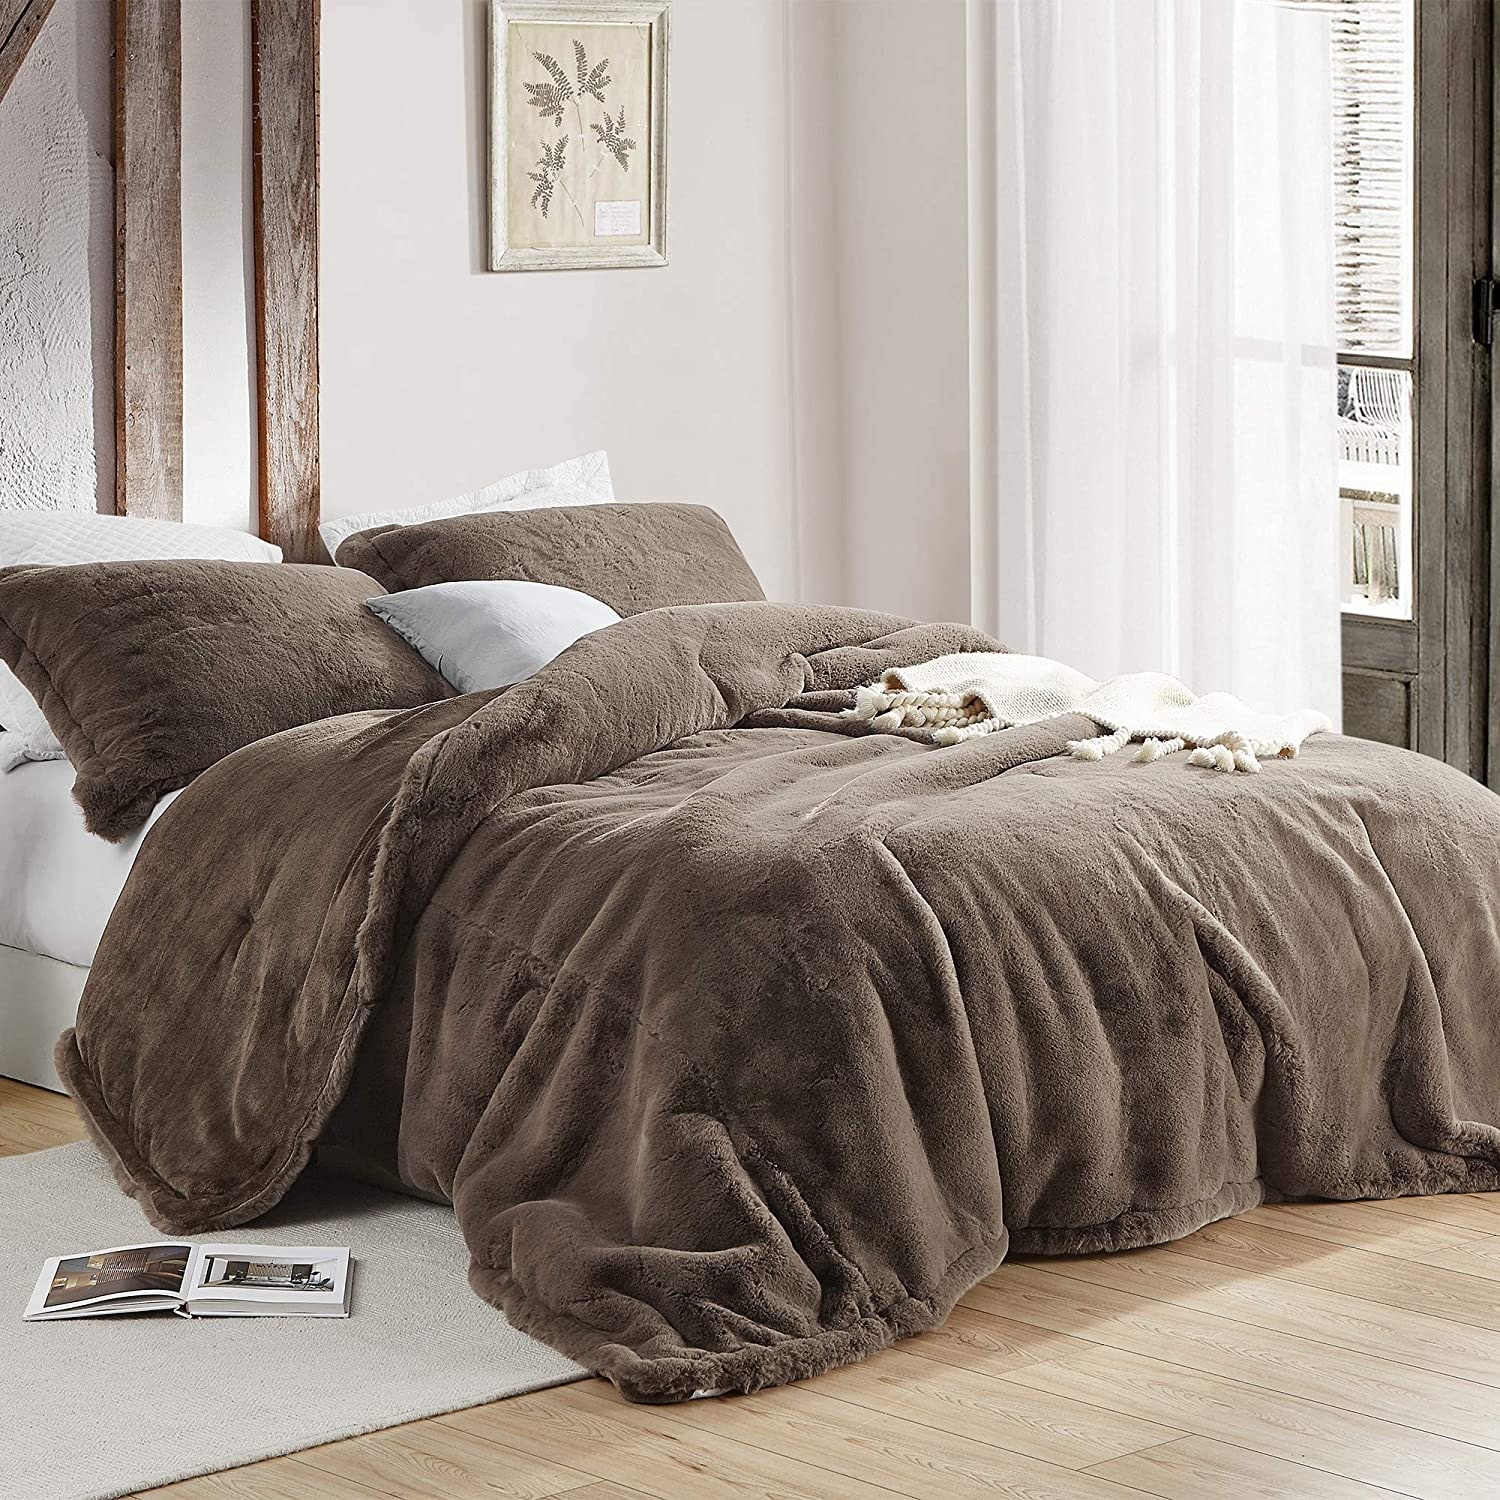 https://ak1.ostkcdn.com/images/products/is/images/direct/97abb7ca23d6445c247e1be1a7b2fc8c78b827db/Chunky-Bunny---Coma-Inducer-Oversized-Comforter---Velveteen-Brown.jpg